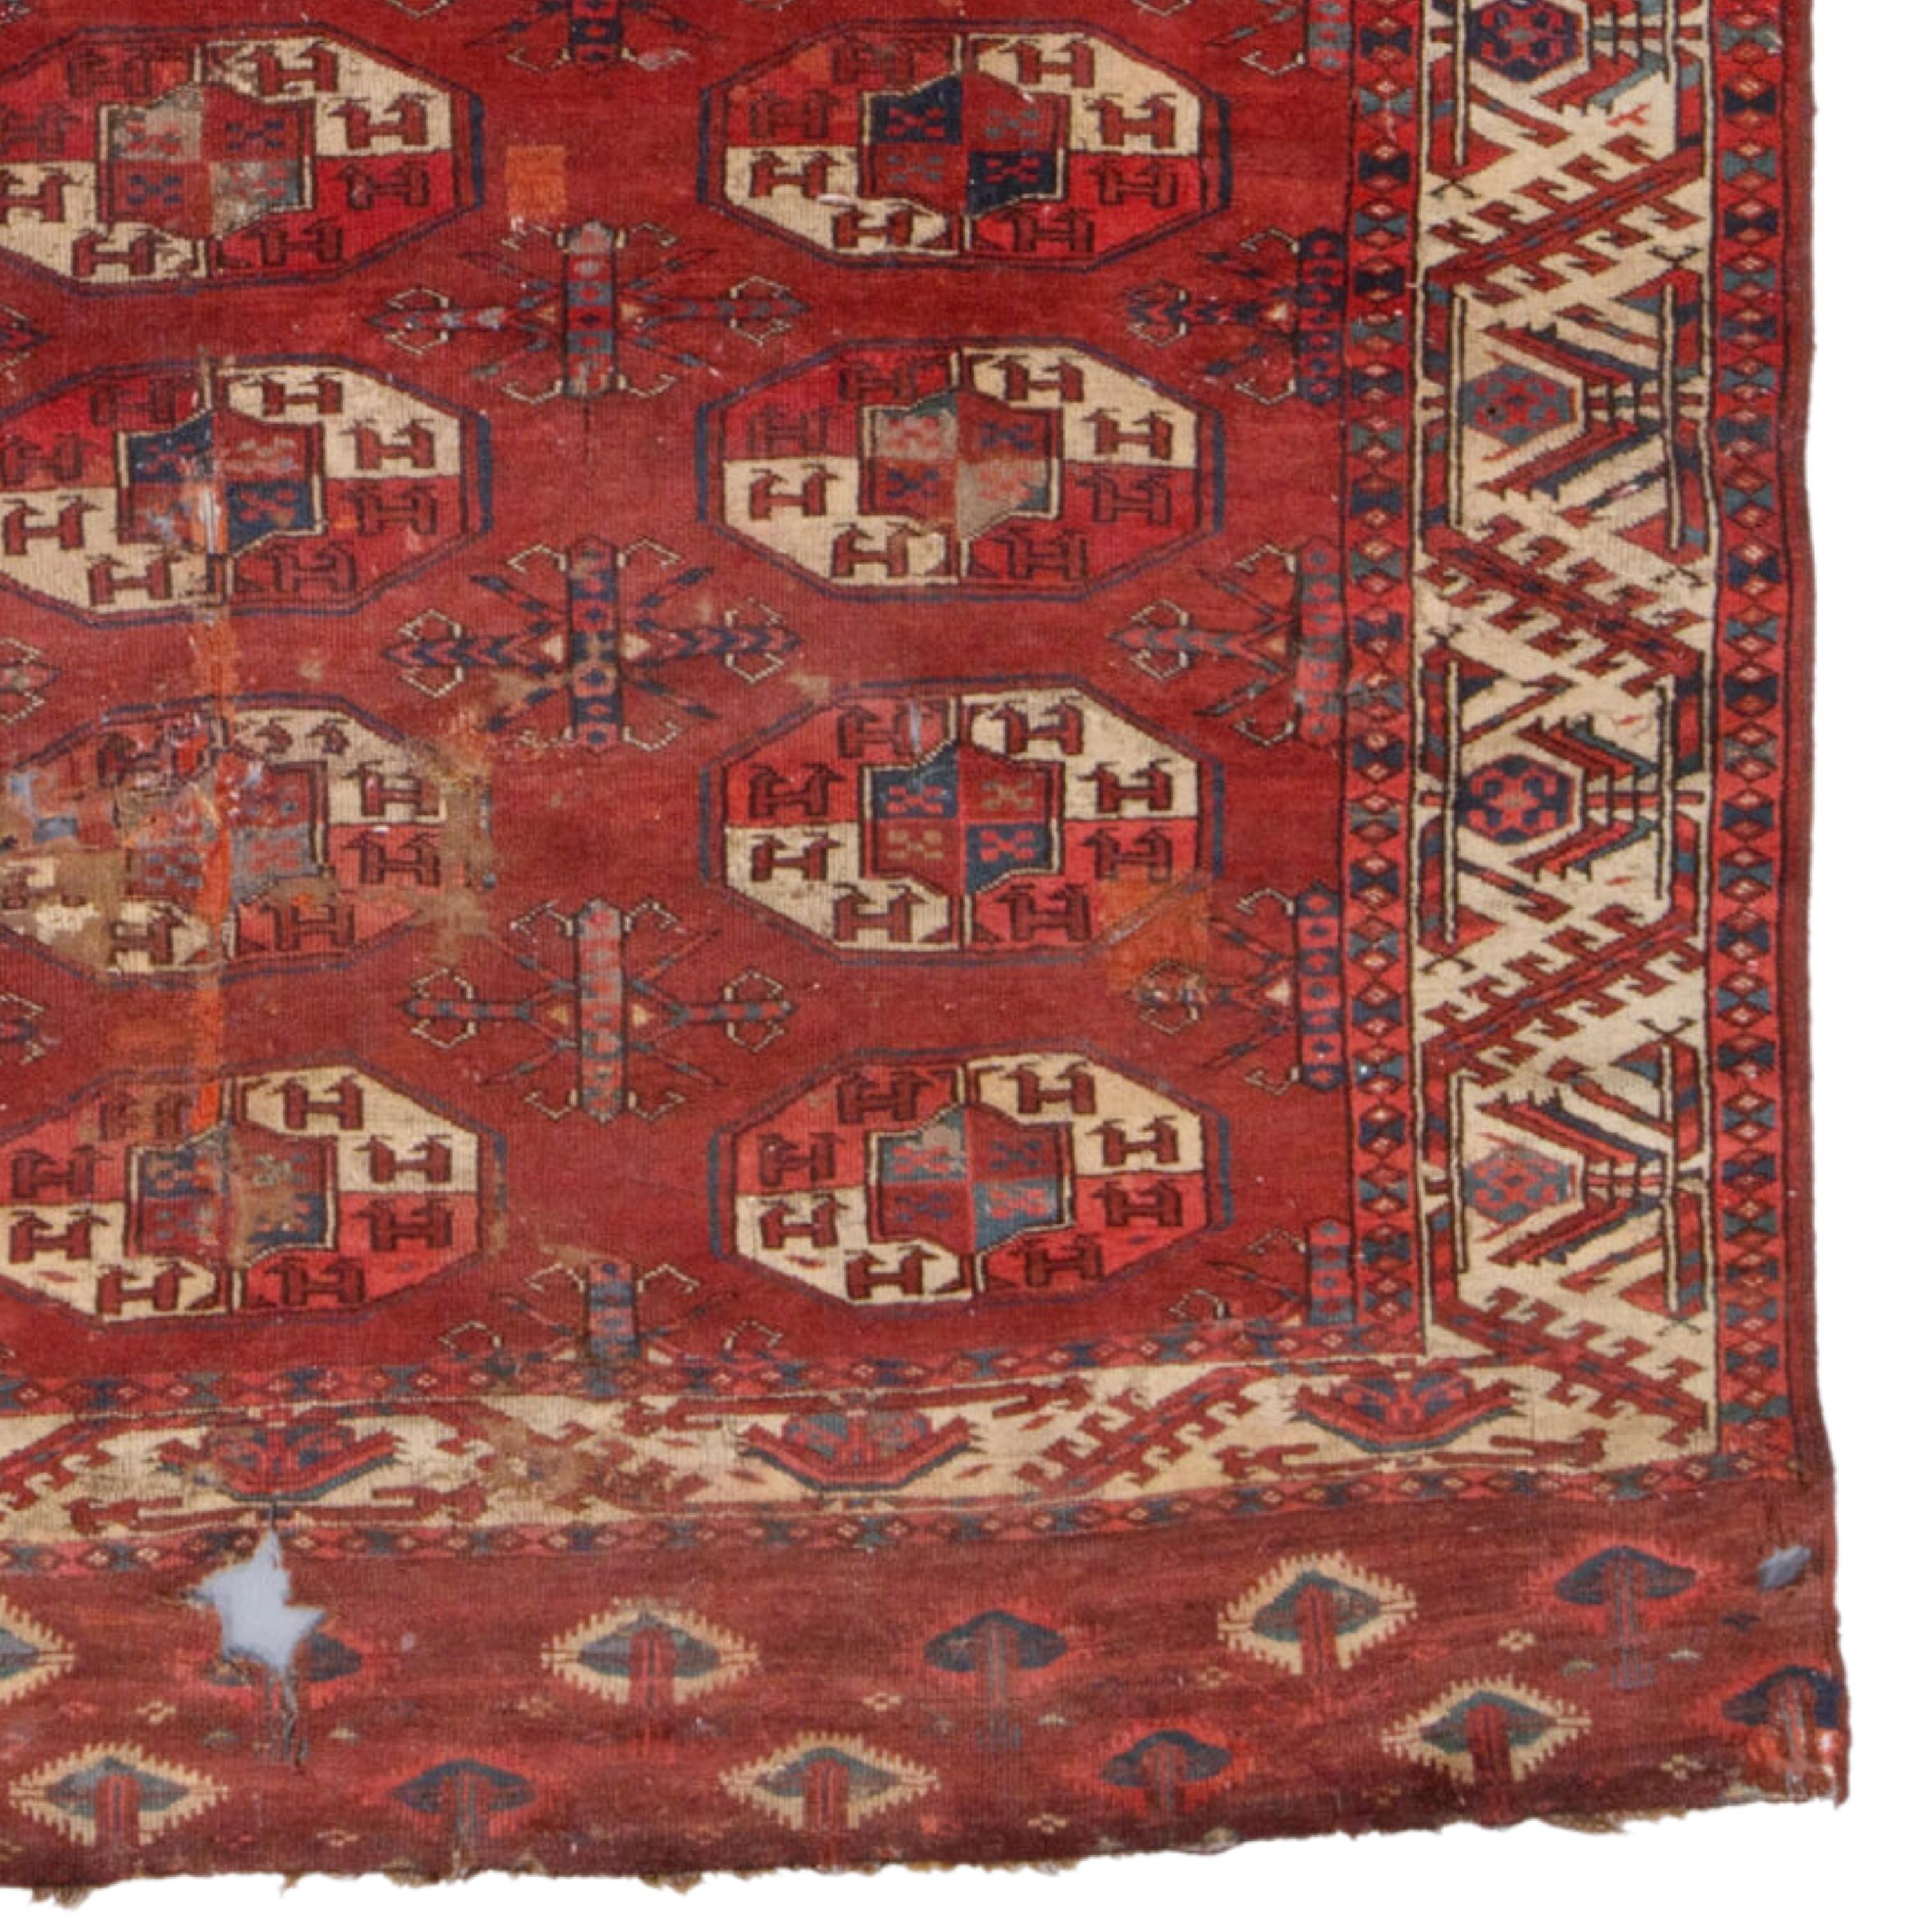 19th Century Antique Yomud Main Carpet - Early Turkmen Yomud Main Rug Circa 1800, Antique Rug For Sale